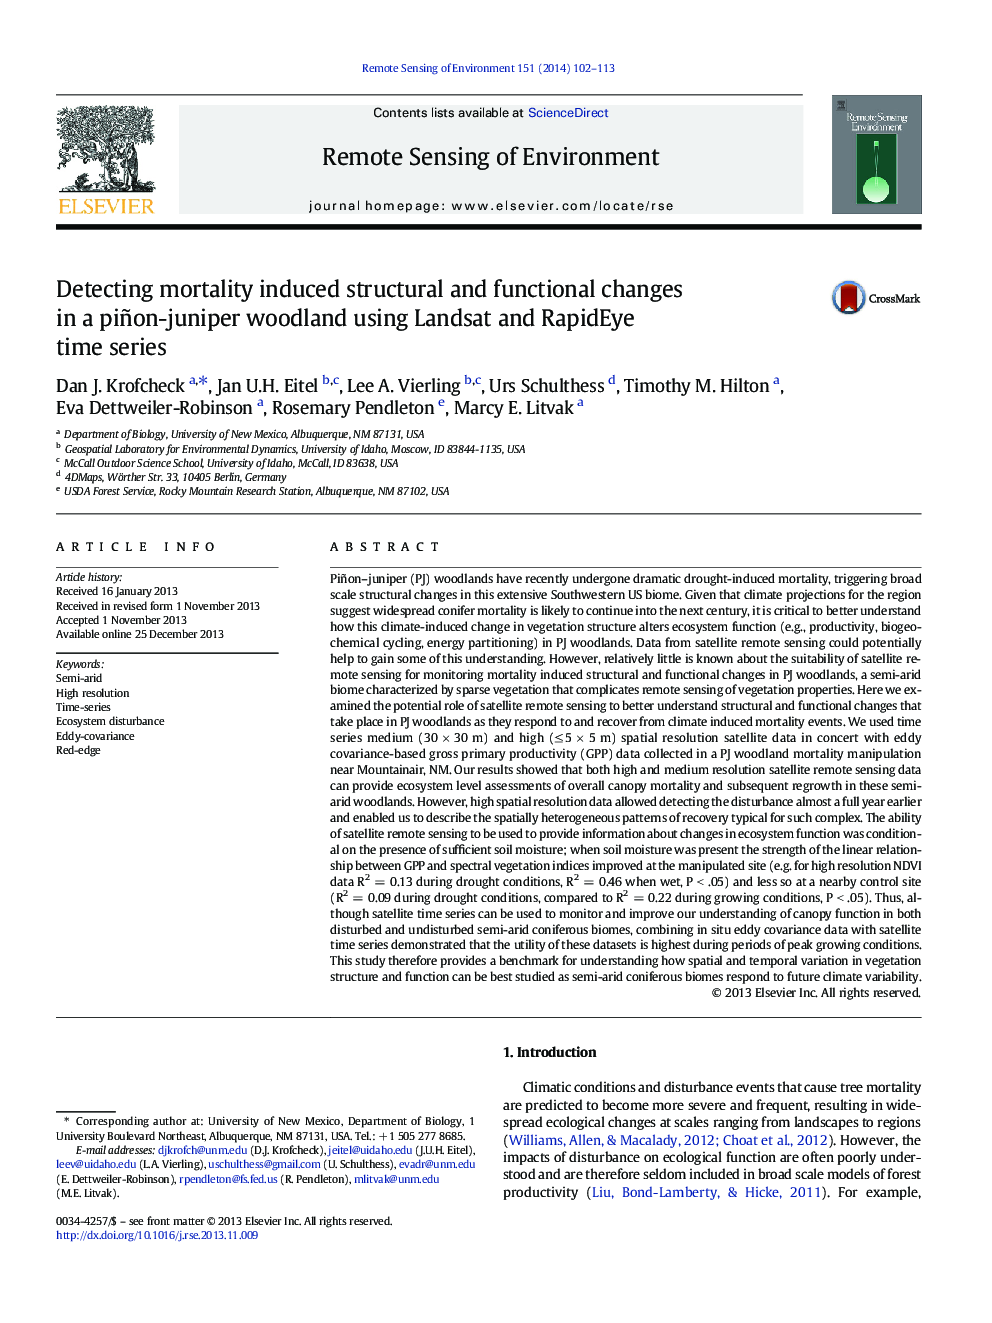 Detecting mortality induced structural and functional changes in a piñon-juniper woodland using Landsat and RapidEye time series